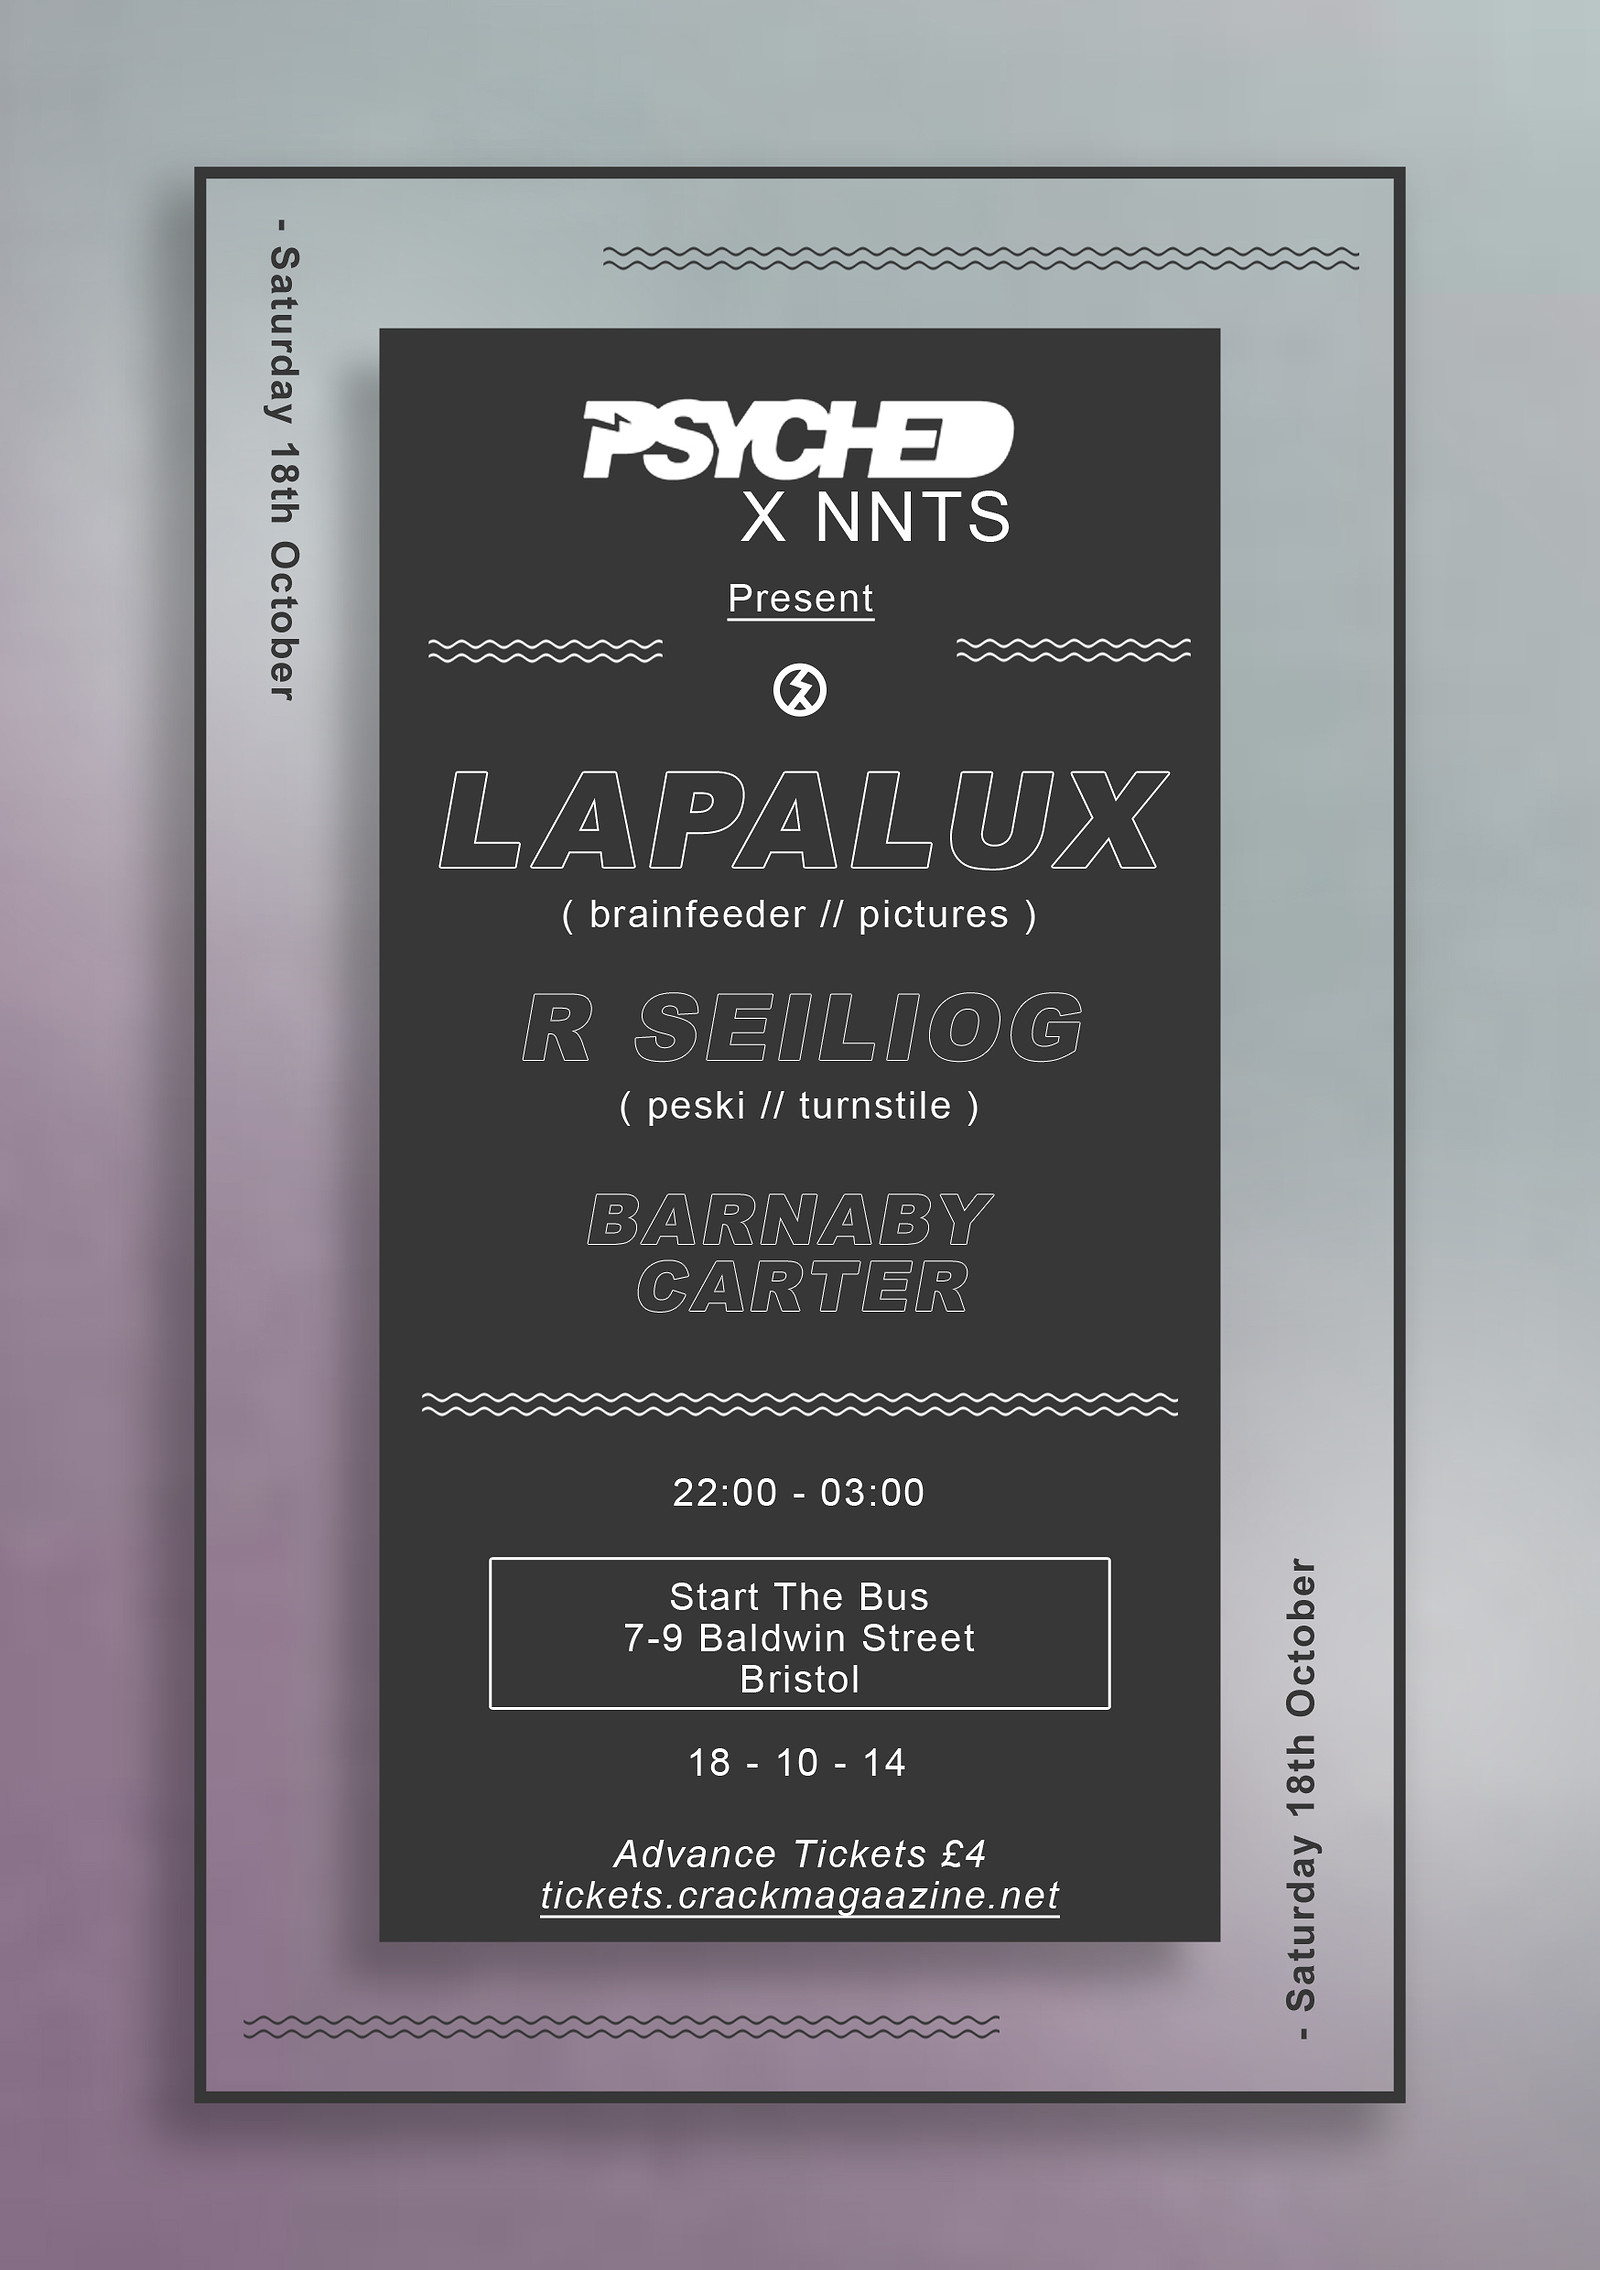 Psyched X Nnts / Lapalux at Start The Bus